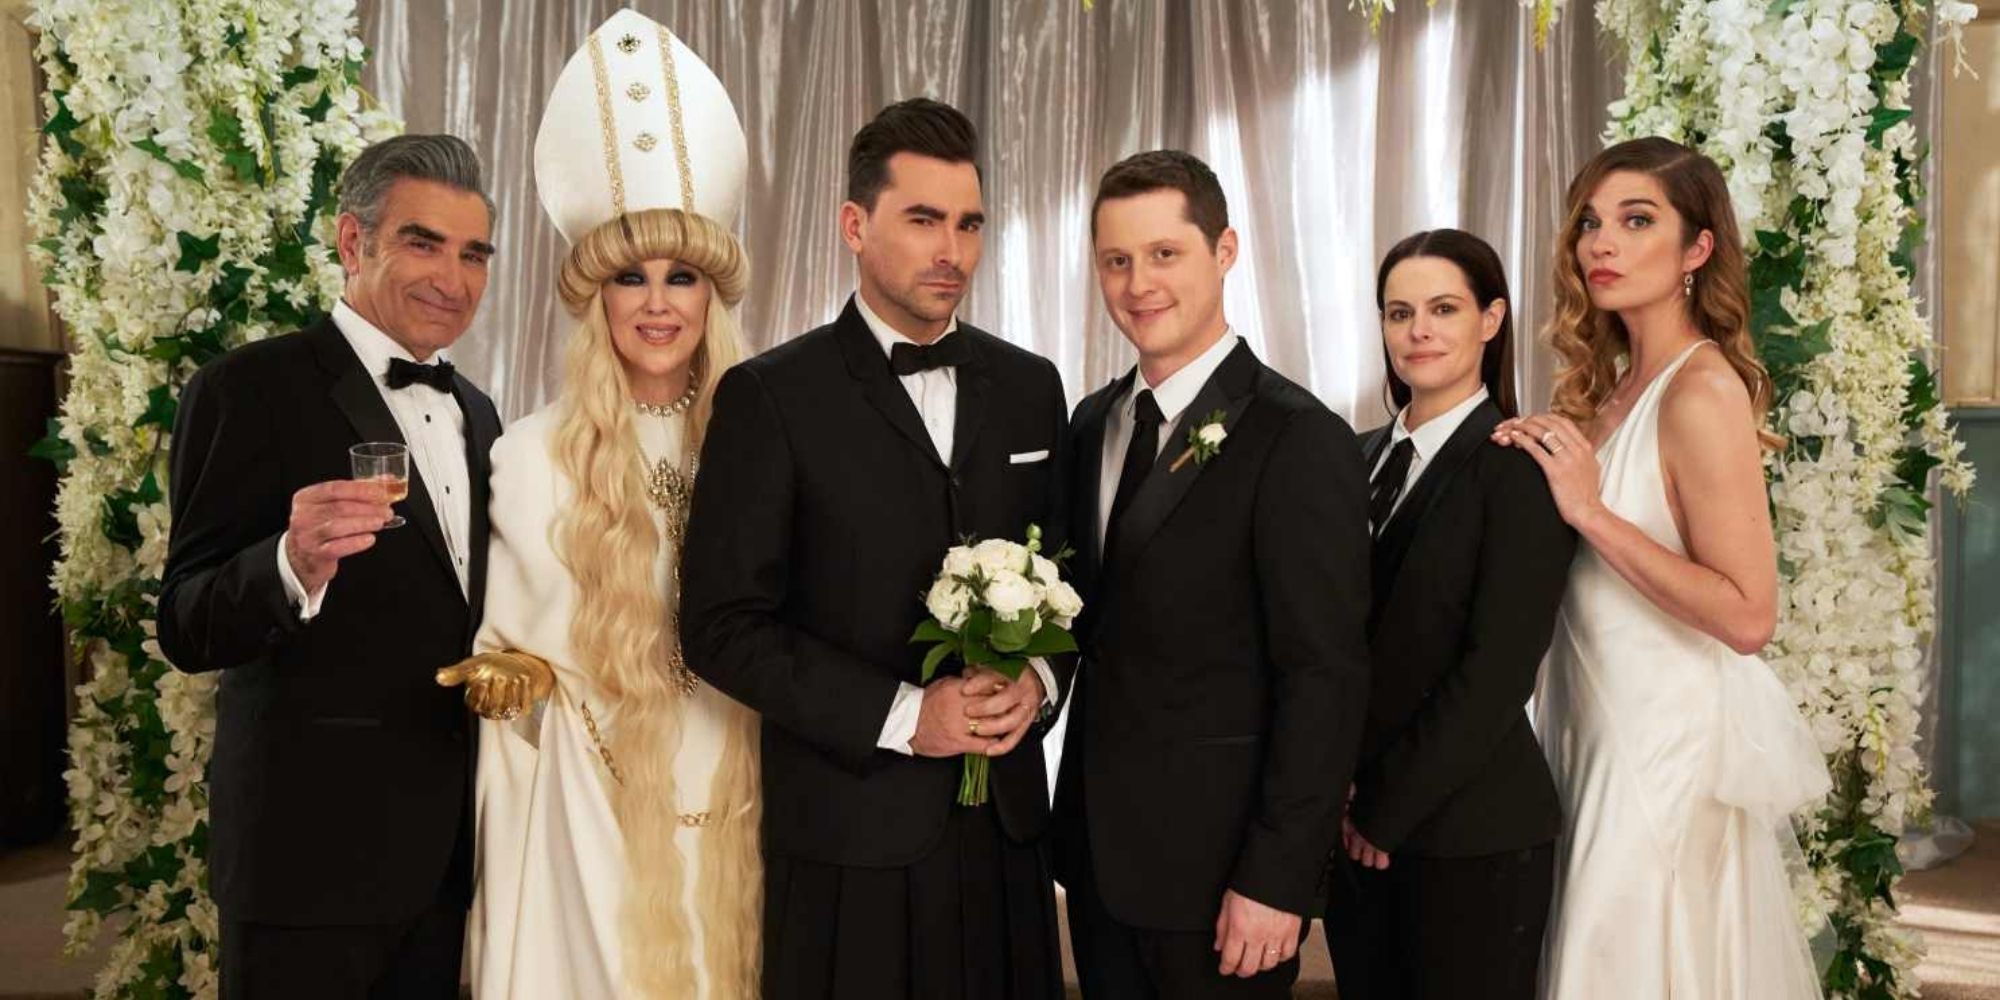 The Rose family from Schitt's Creek standing together